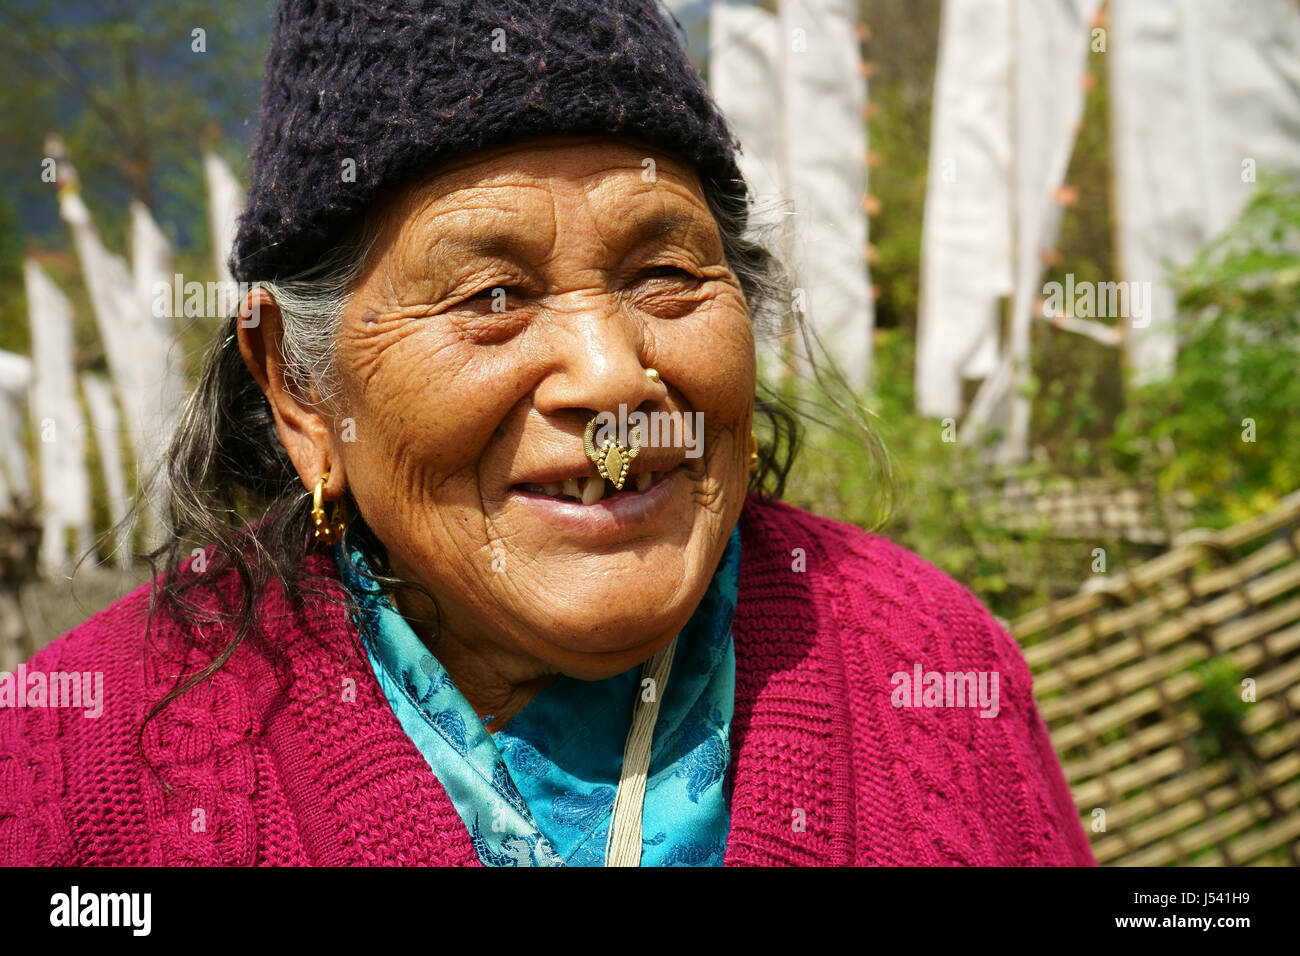 Older women of the Grurung tribe withtrraditional jewelery, a golden ring in nose and earrings. Yuksom, Sikkim, India Stock Photo